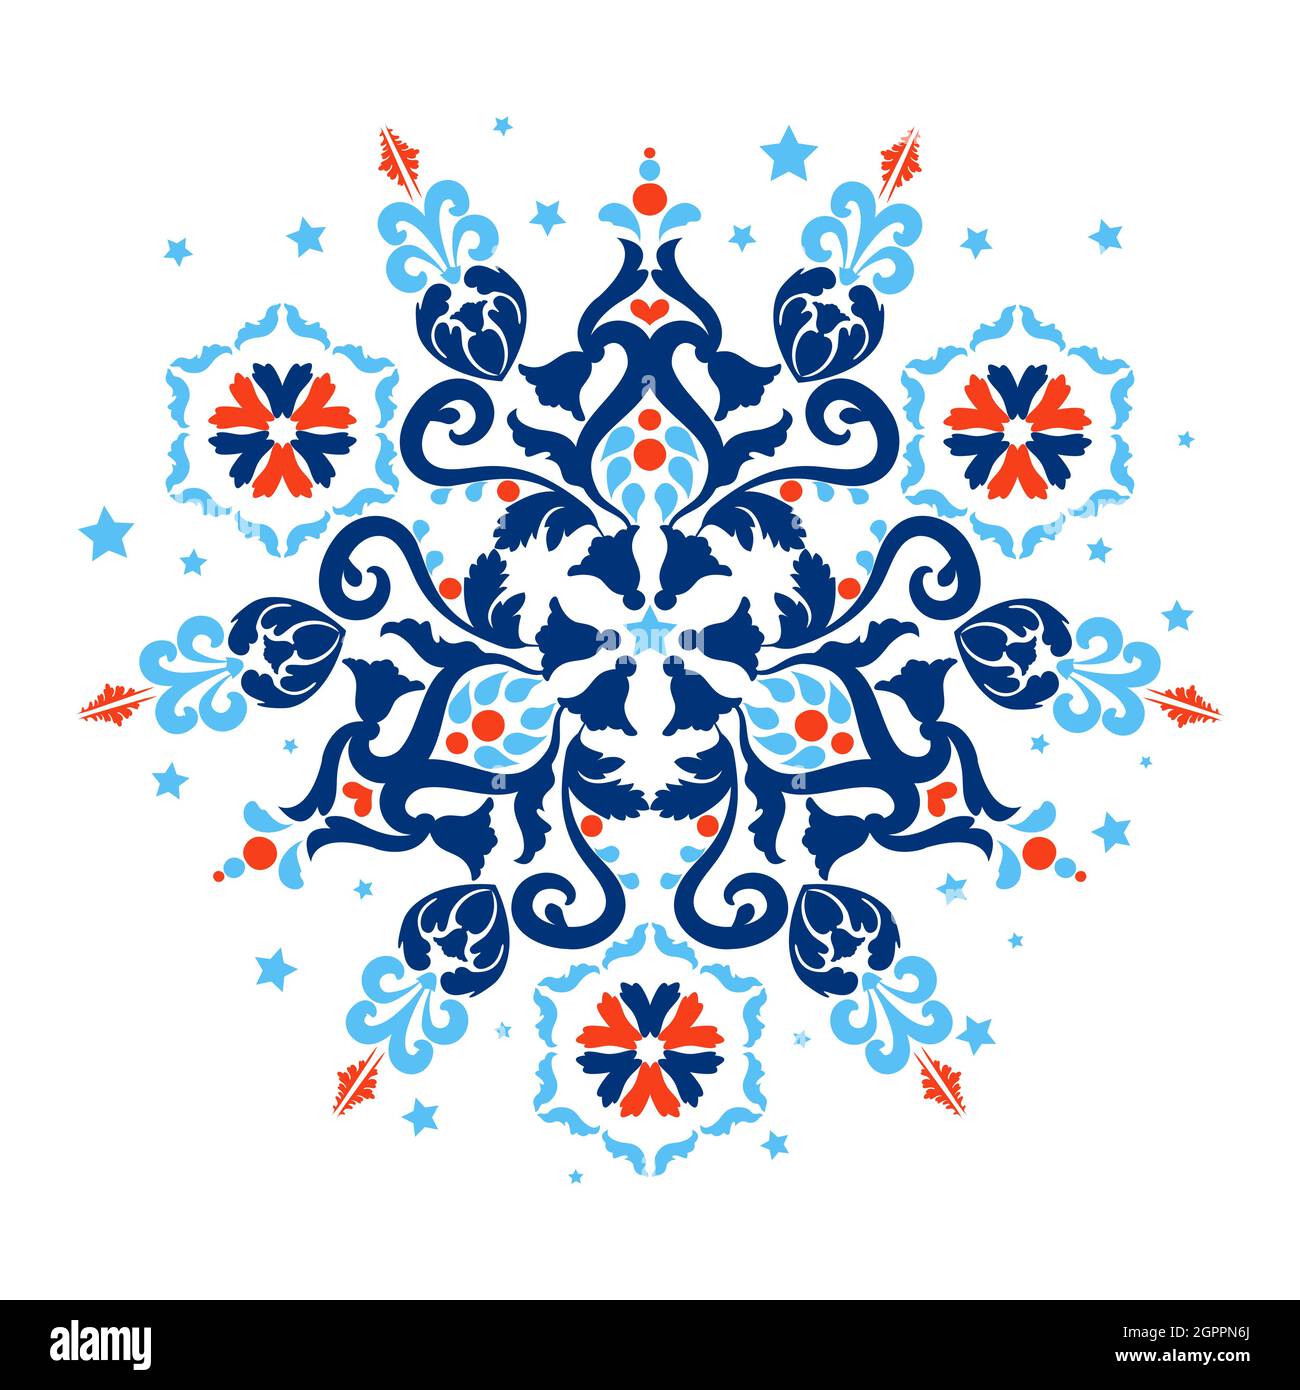 Classic vintage motif with floral elements. Arabesque ornament. Blue, red, white colors. Decorative tiles with ornaments. Vector illustration. Stock Vector